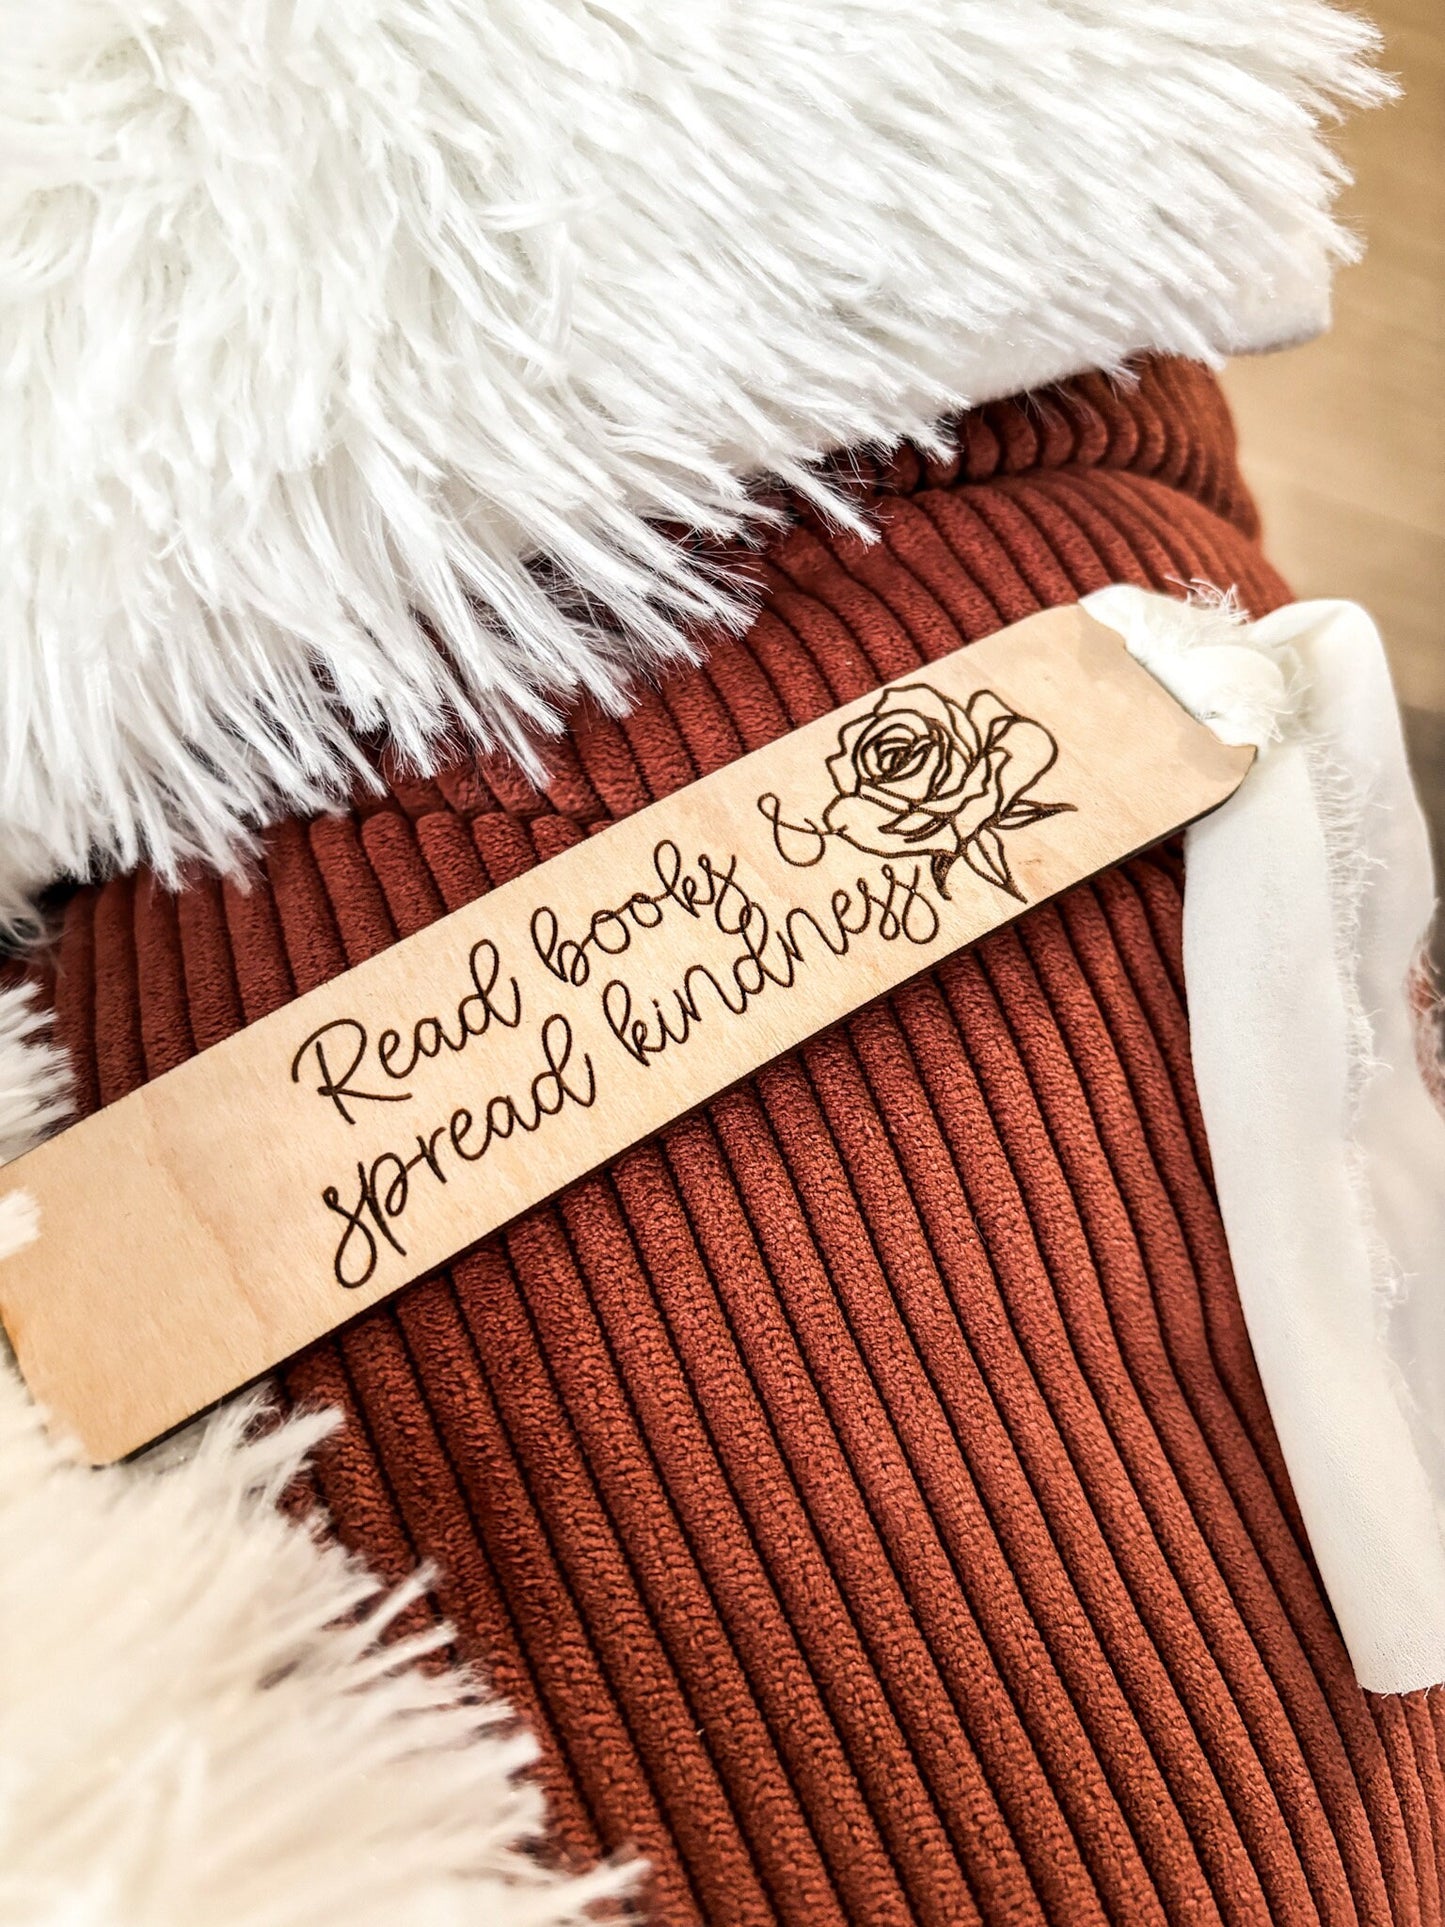 Read Books, Spread Kindness Wood Bookmark, Acrylic Bookmark, Funny Bookmark Gift, Laser Engraved Bookmark, Aesthetic Acrylic Floral Bookmark